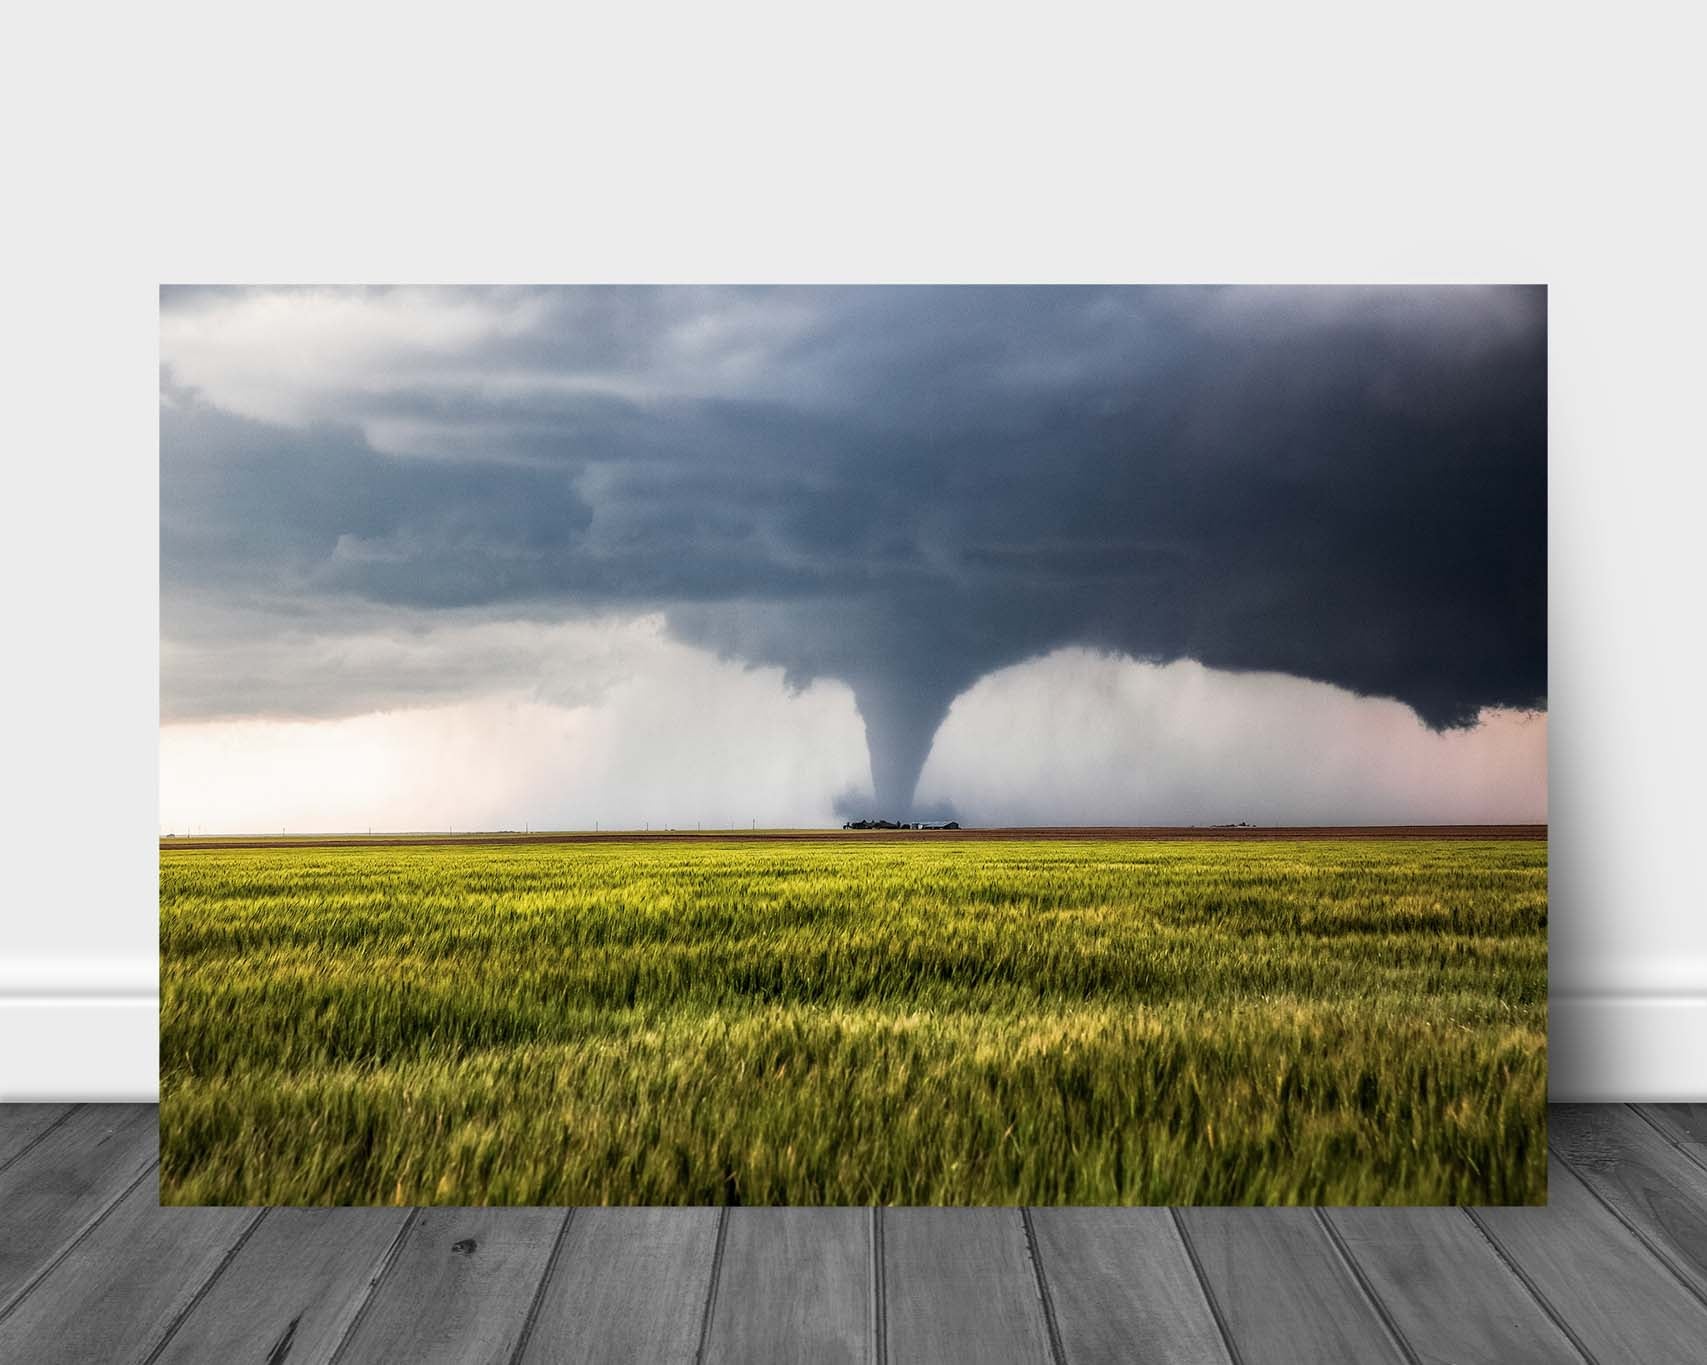 Storm metal print on aluminum of a large tornado passing safely behind a farmhouse in a wheat field on a stormy spring day in Kansas by Sean Ramsey of Southern Plains Photography.